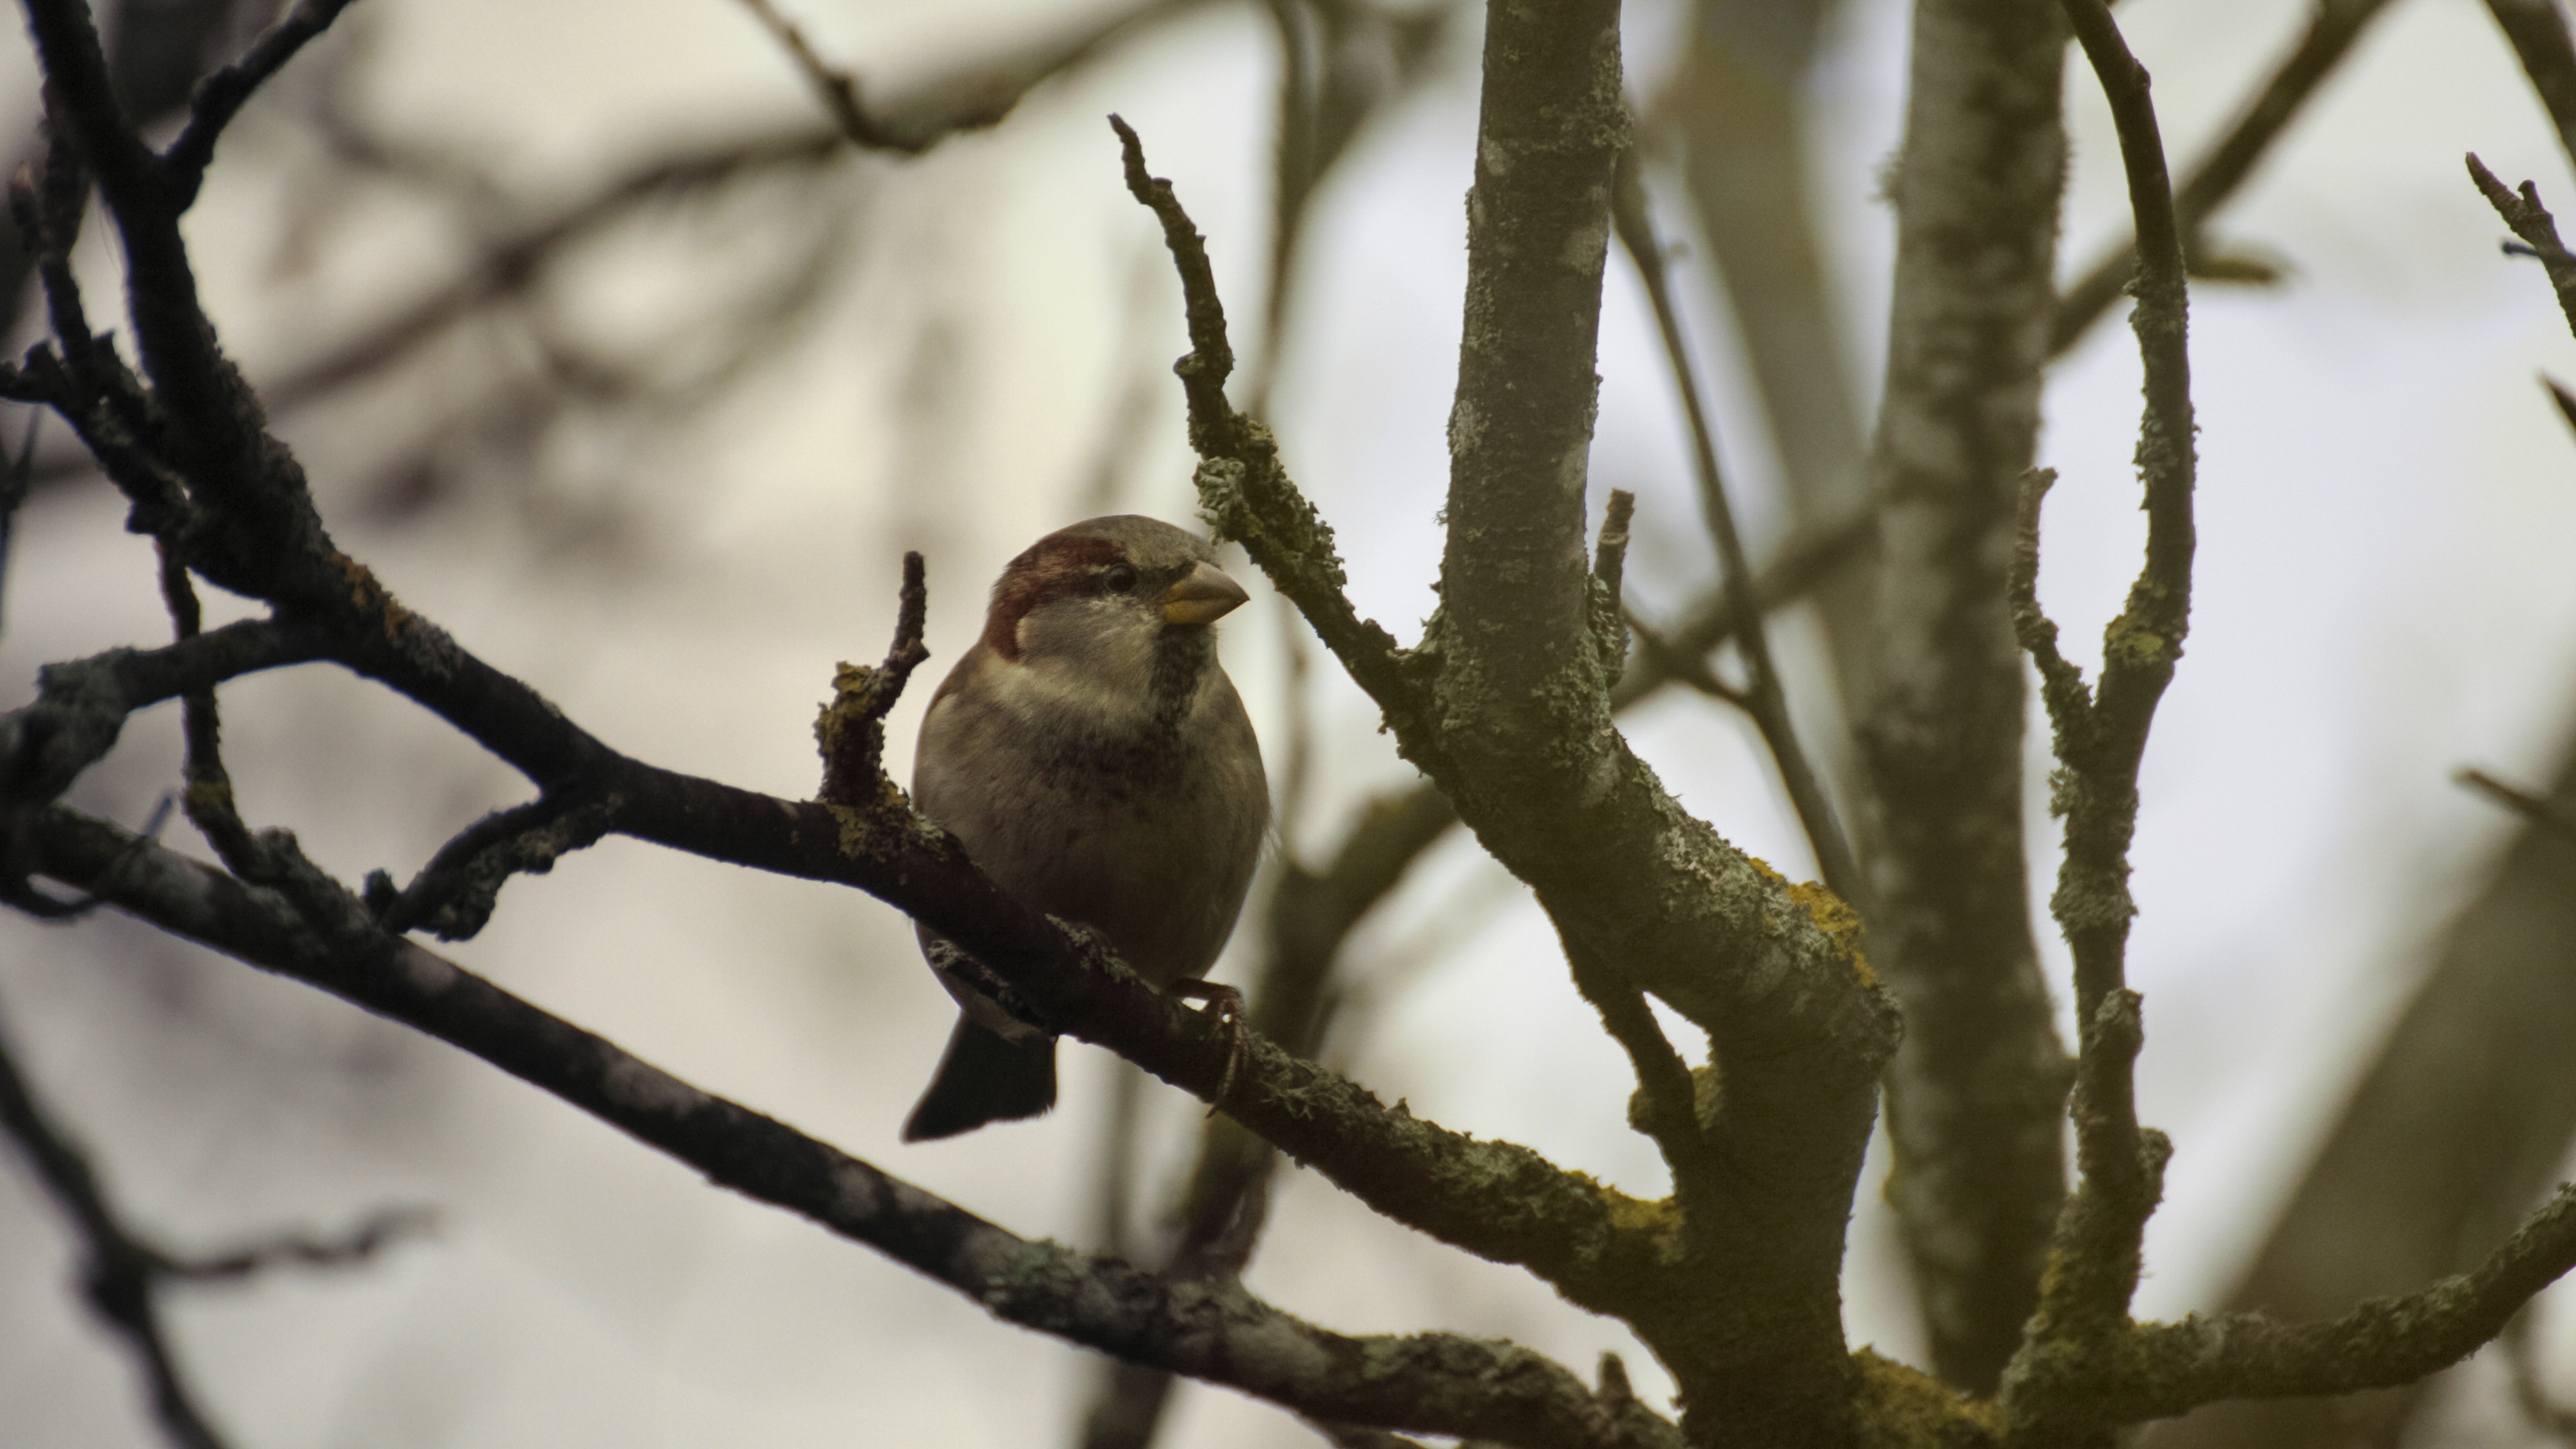 brown finch on tree branch at daytime